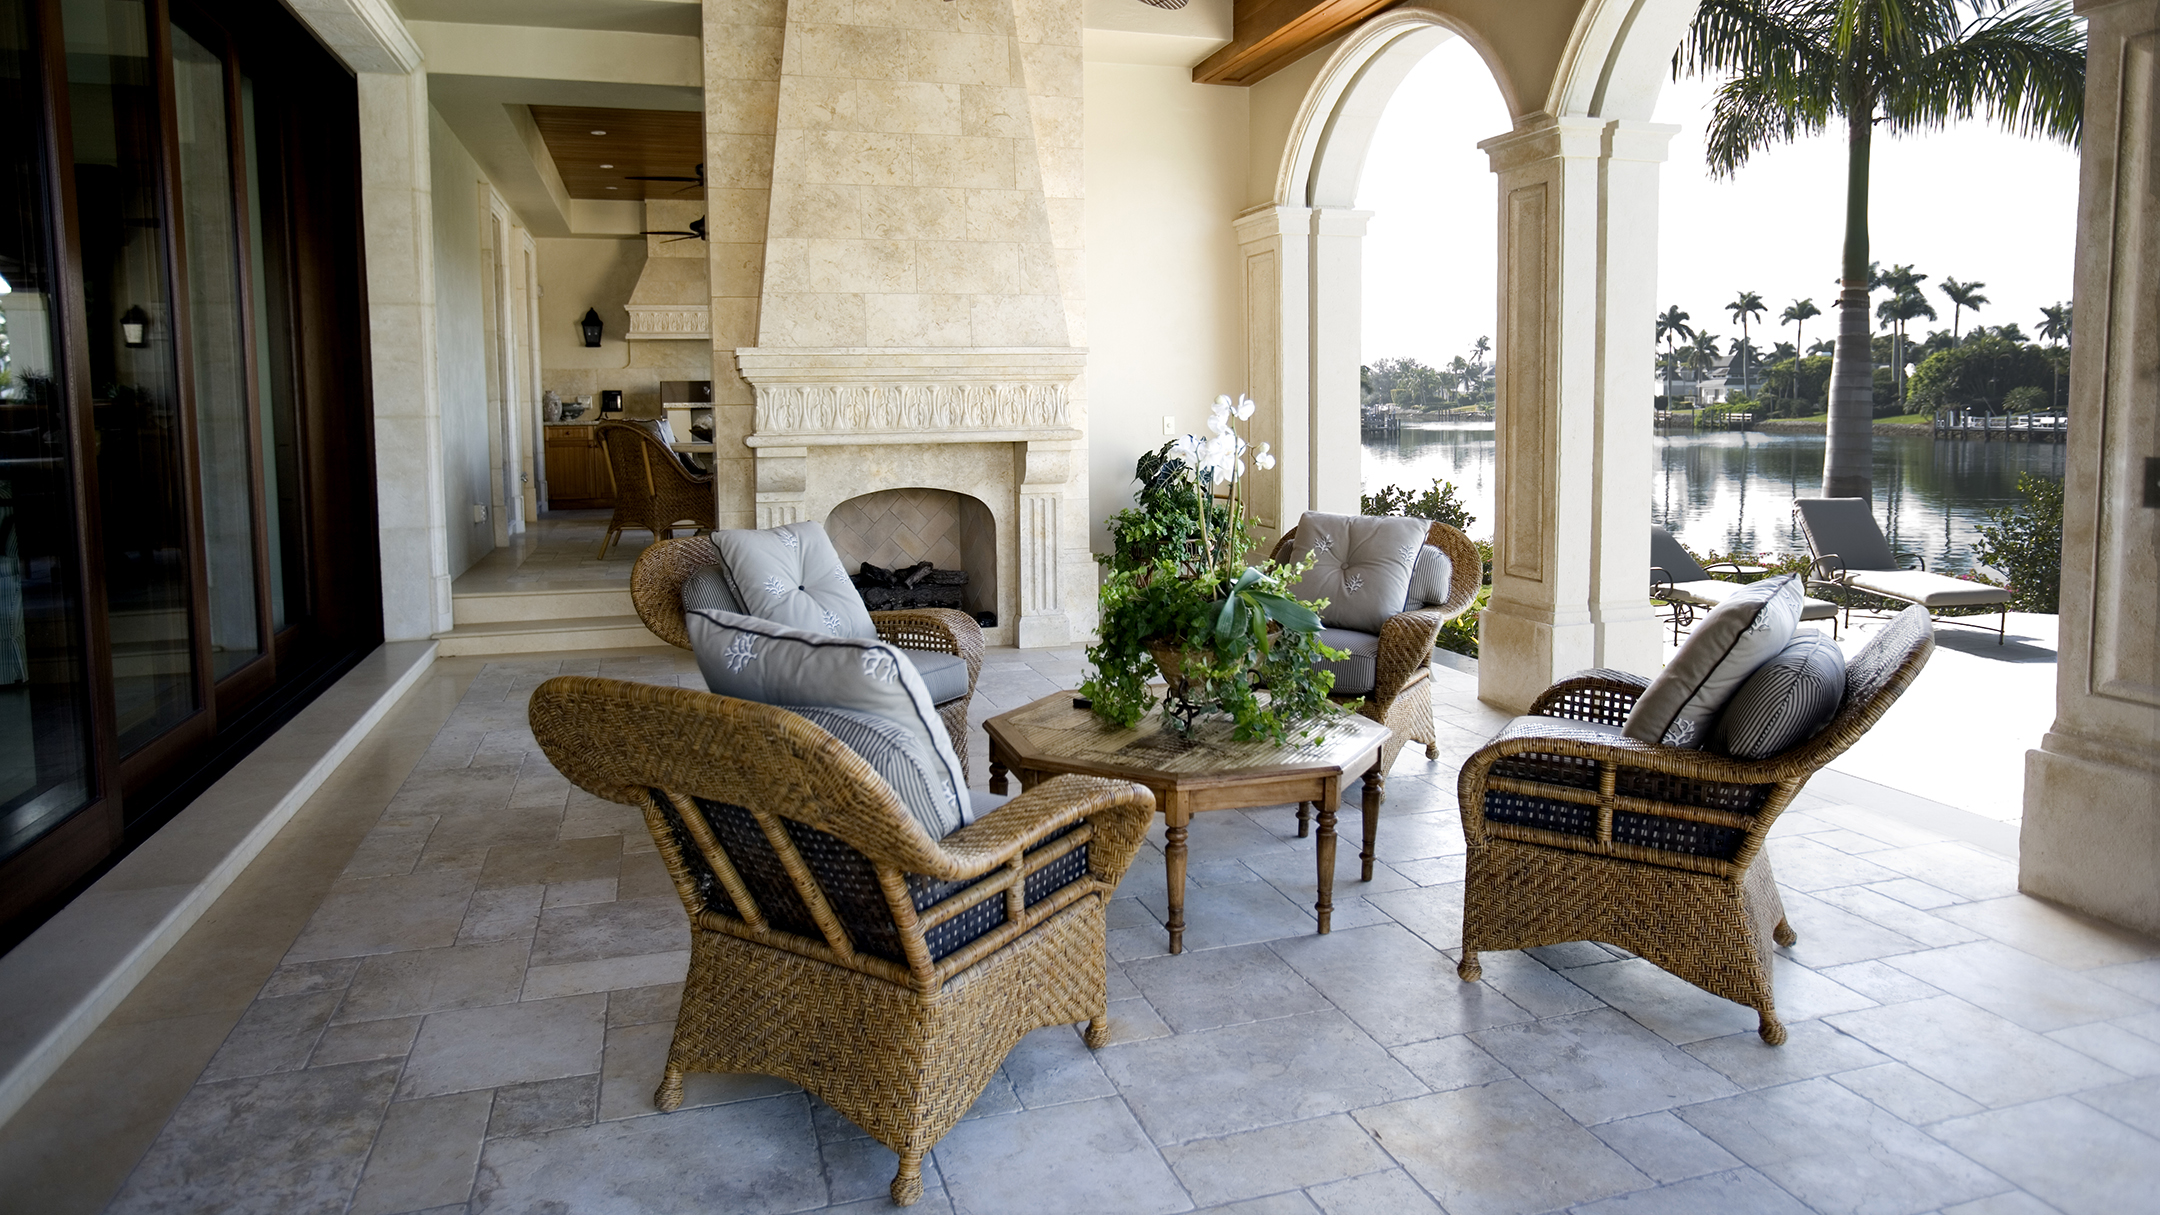 Patio furniture overlooking the Naples Bay